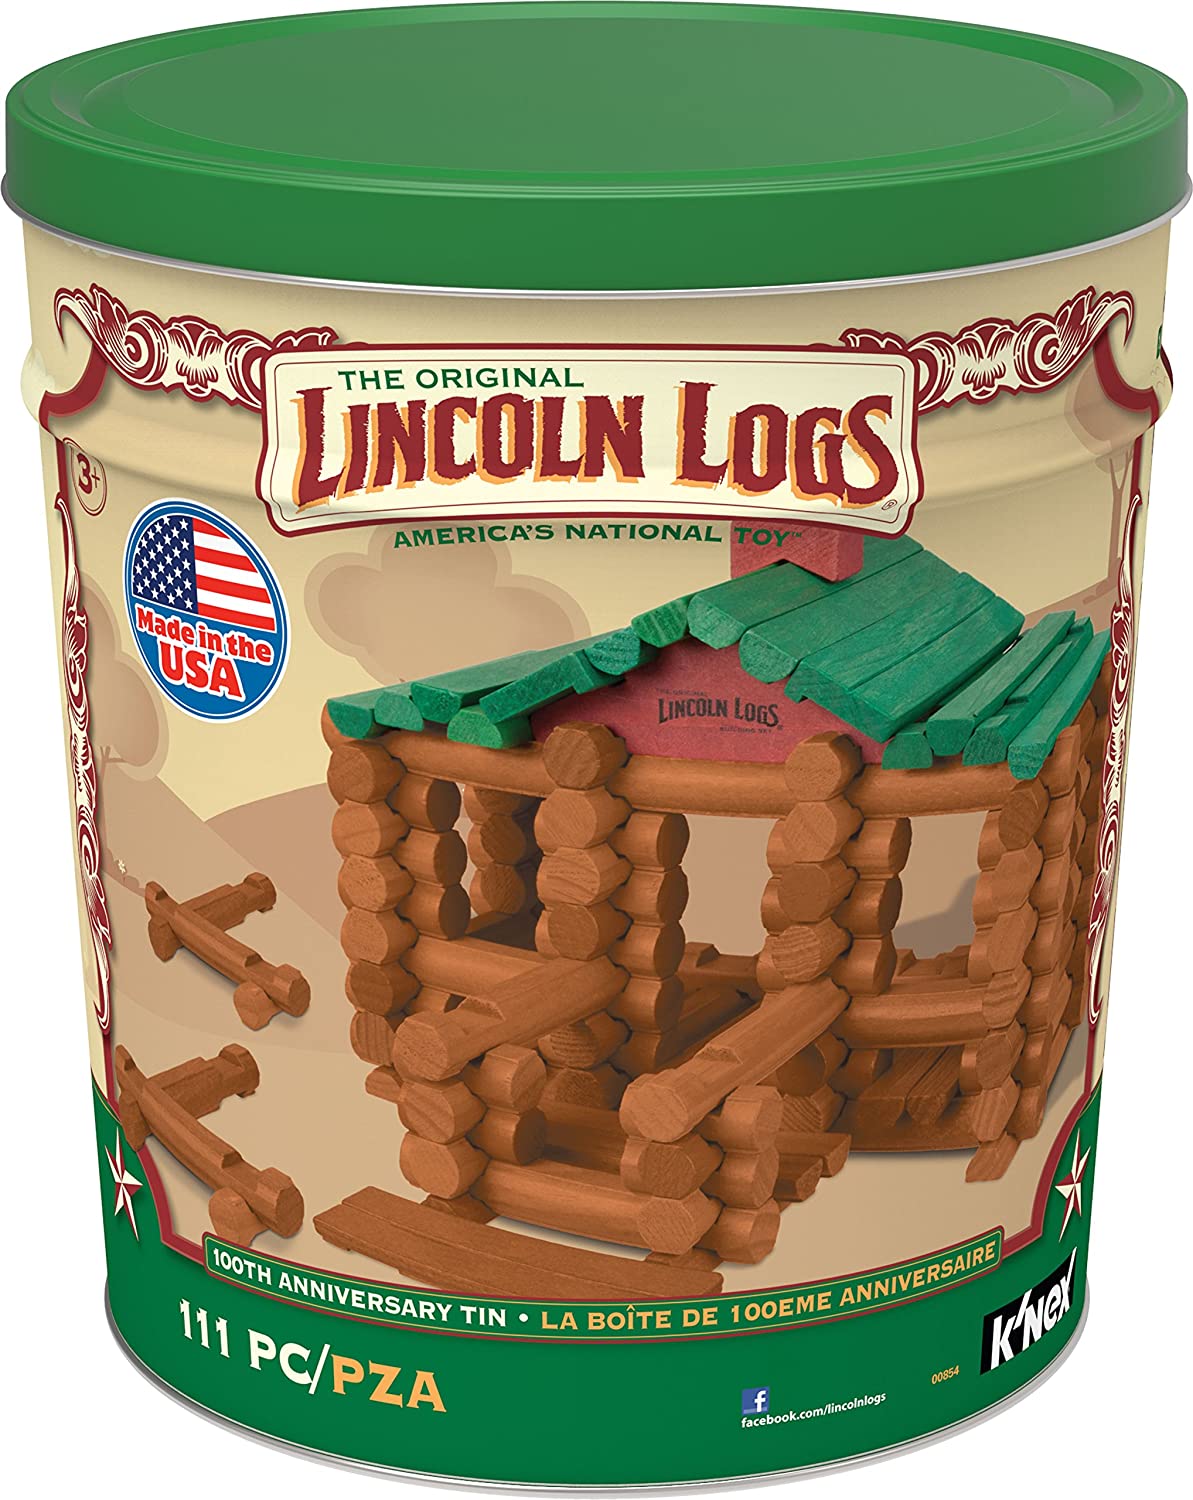 Lincoln Logs 100th Anniversary Tin — one of the original STEAM toys